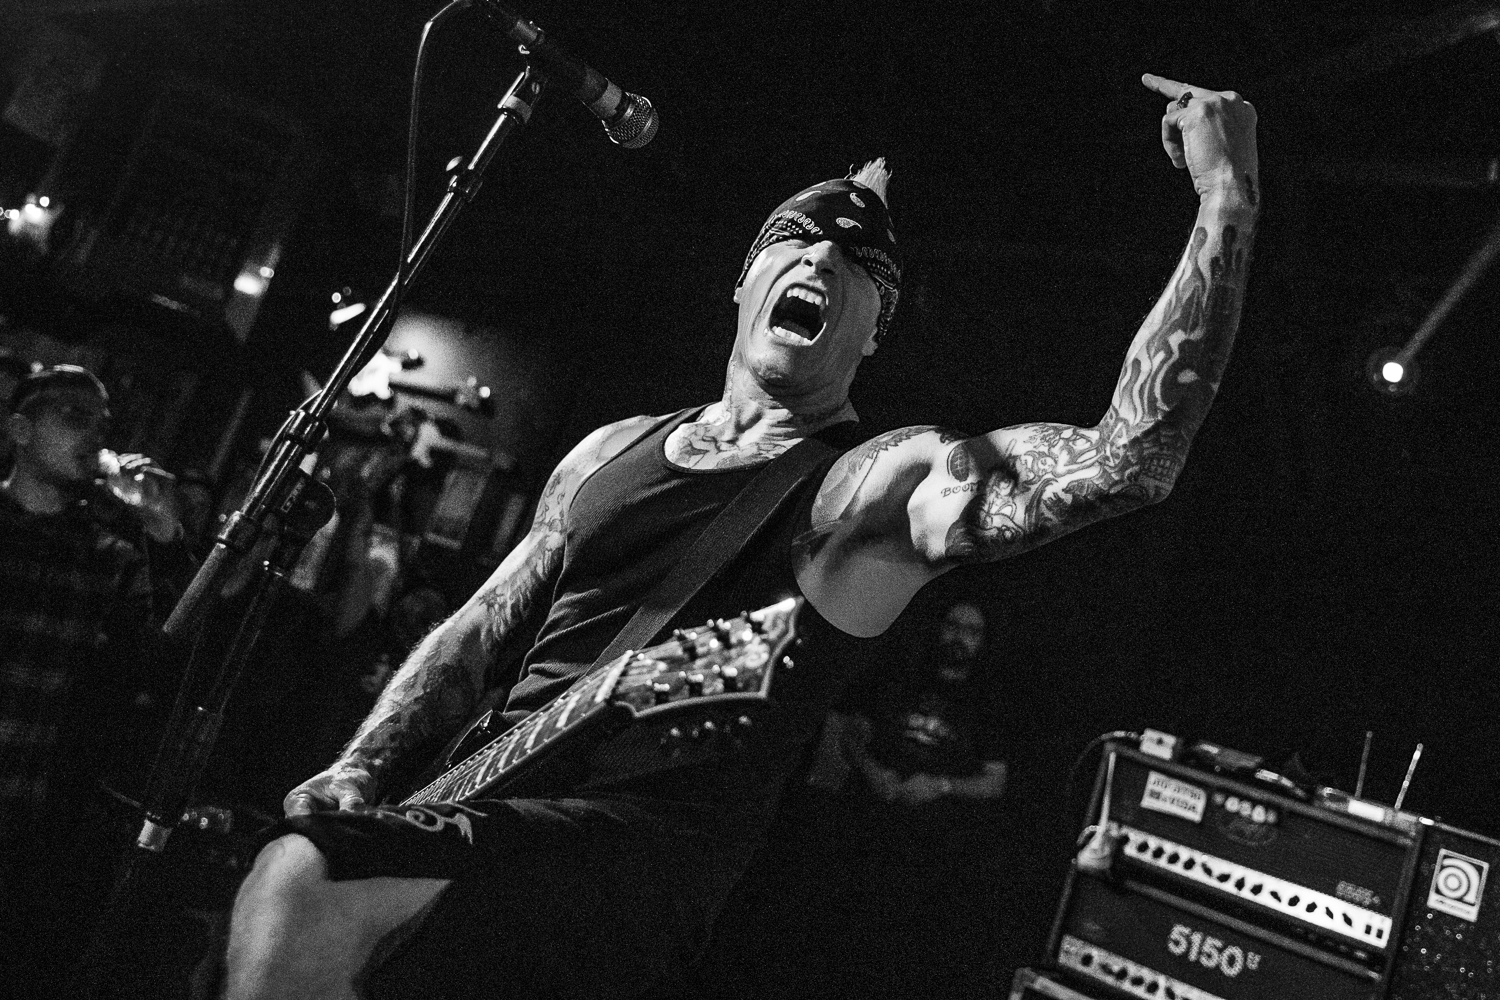 In Photo: Life of Agony, Sick of It All and BillyBio rock New Jersey's Stone Pony